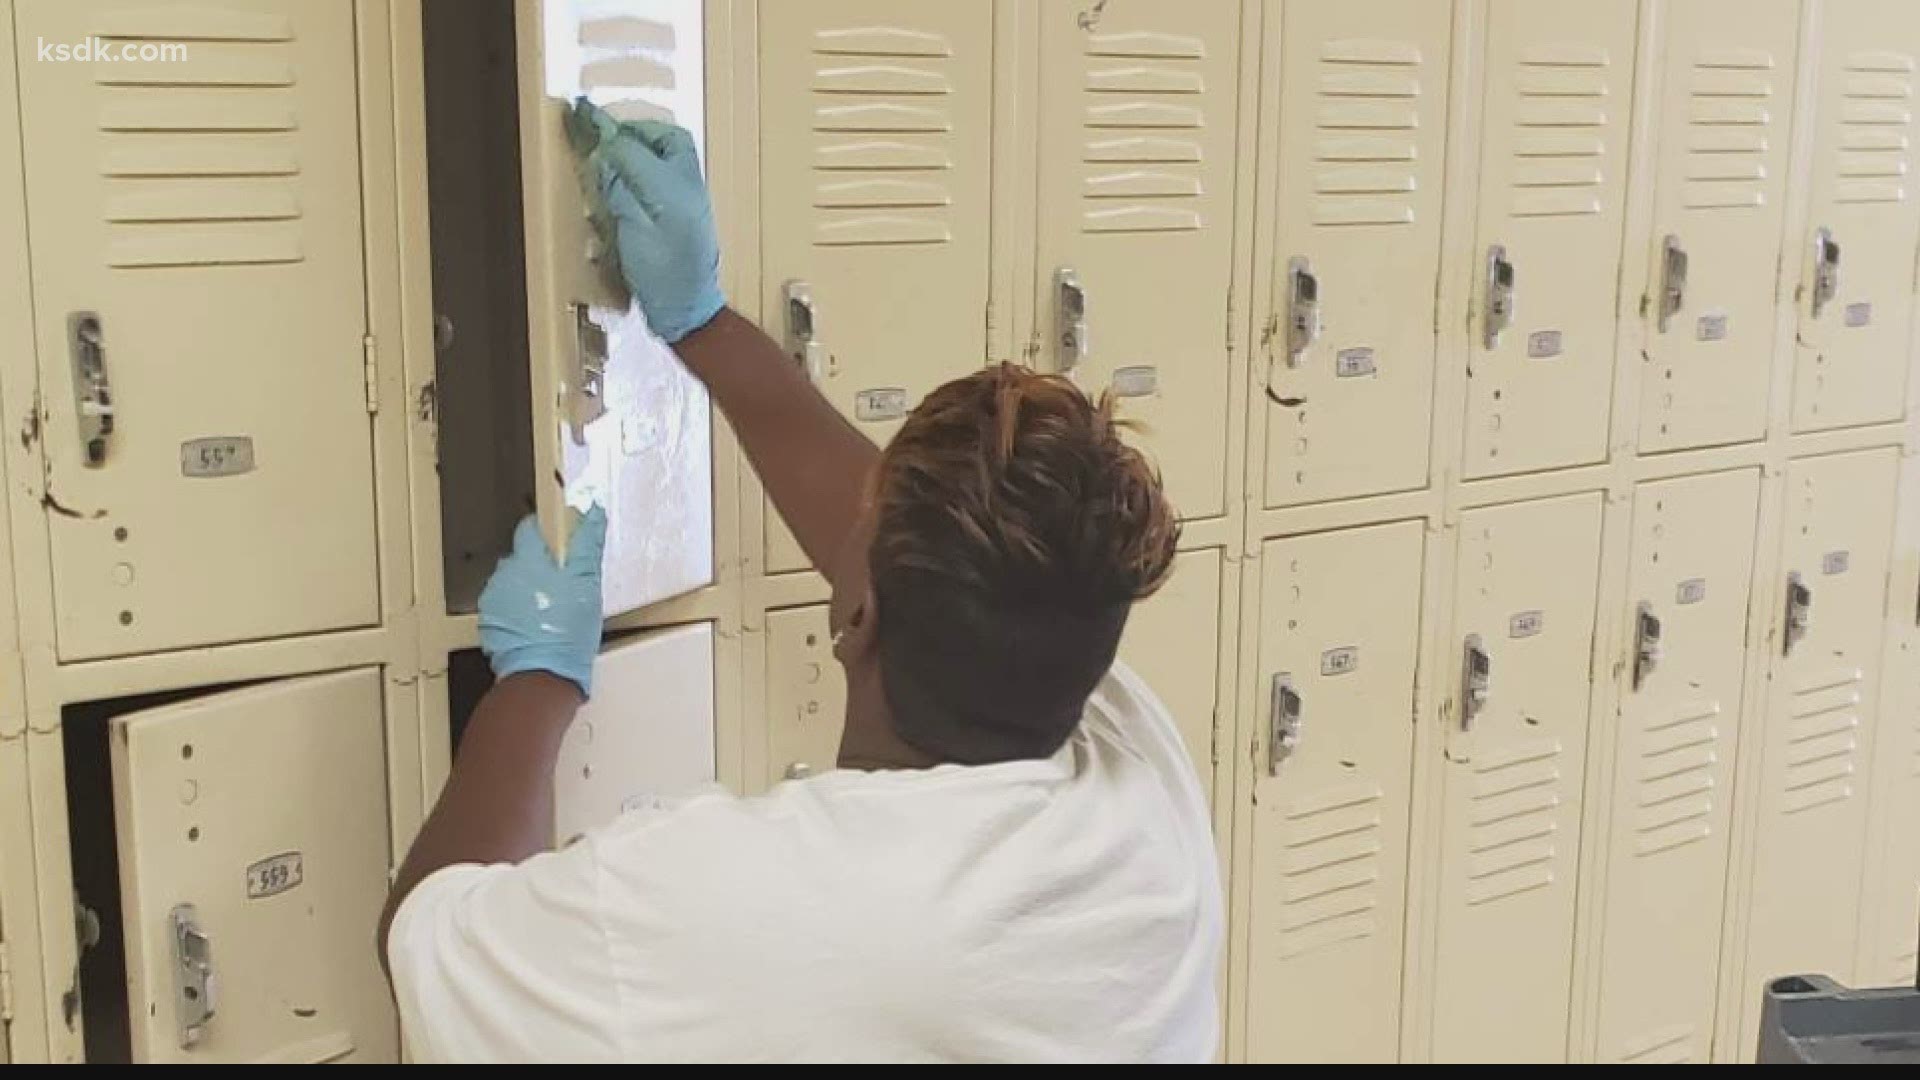 "We have been working throughout the pandemic and all summer long. We want to get the schools ready, but I still think it's too soon for the kids," said Ricky Gray.